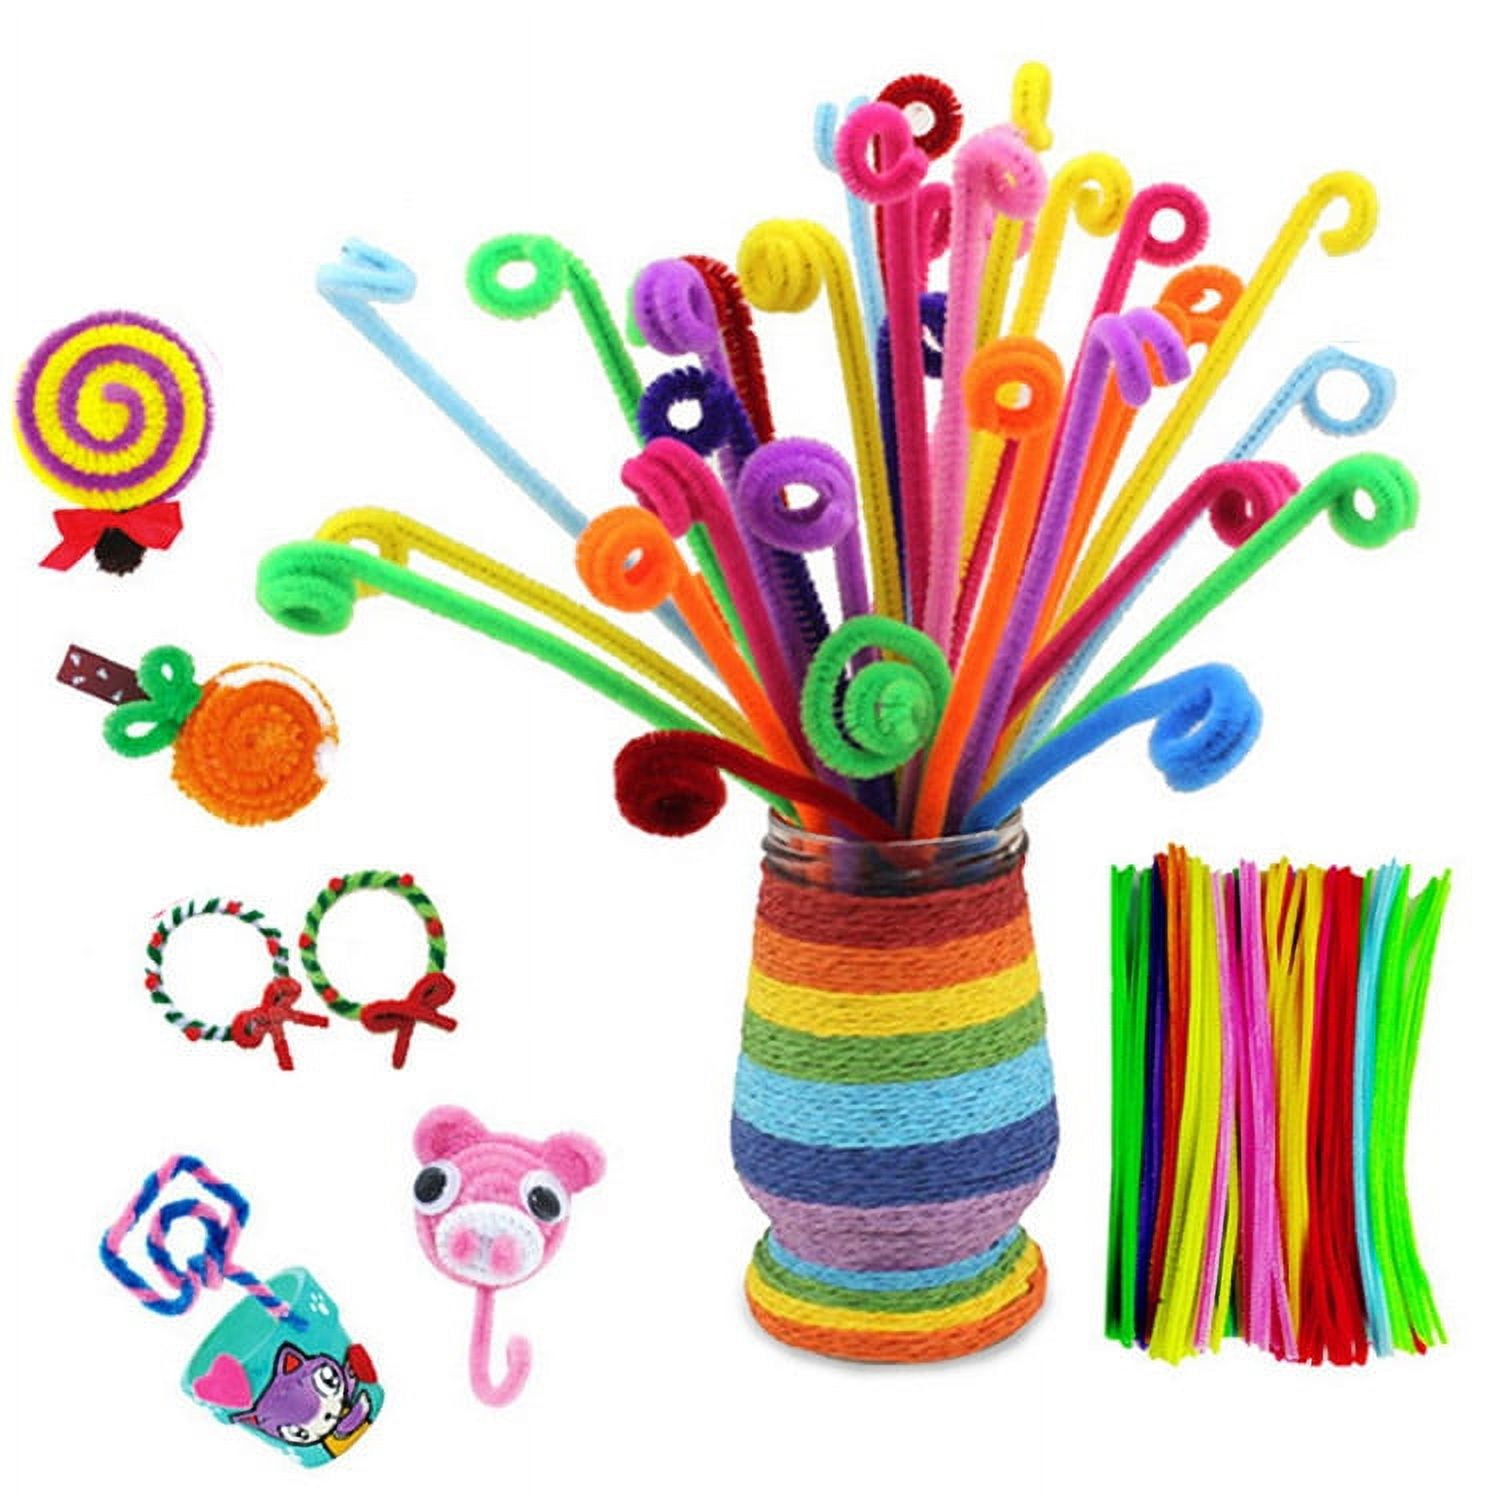 Craft Pipe Cleaners 100 Pcs Black Chenille Stem 6mm X 12 Inch Twistable  Stems Children\u2019s Bendable Sculpting Sticks For Crafts And Arts (100,  Blac